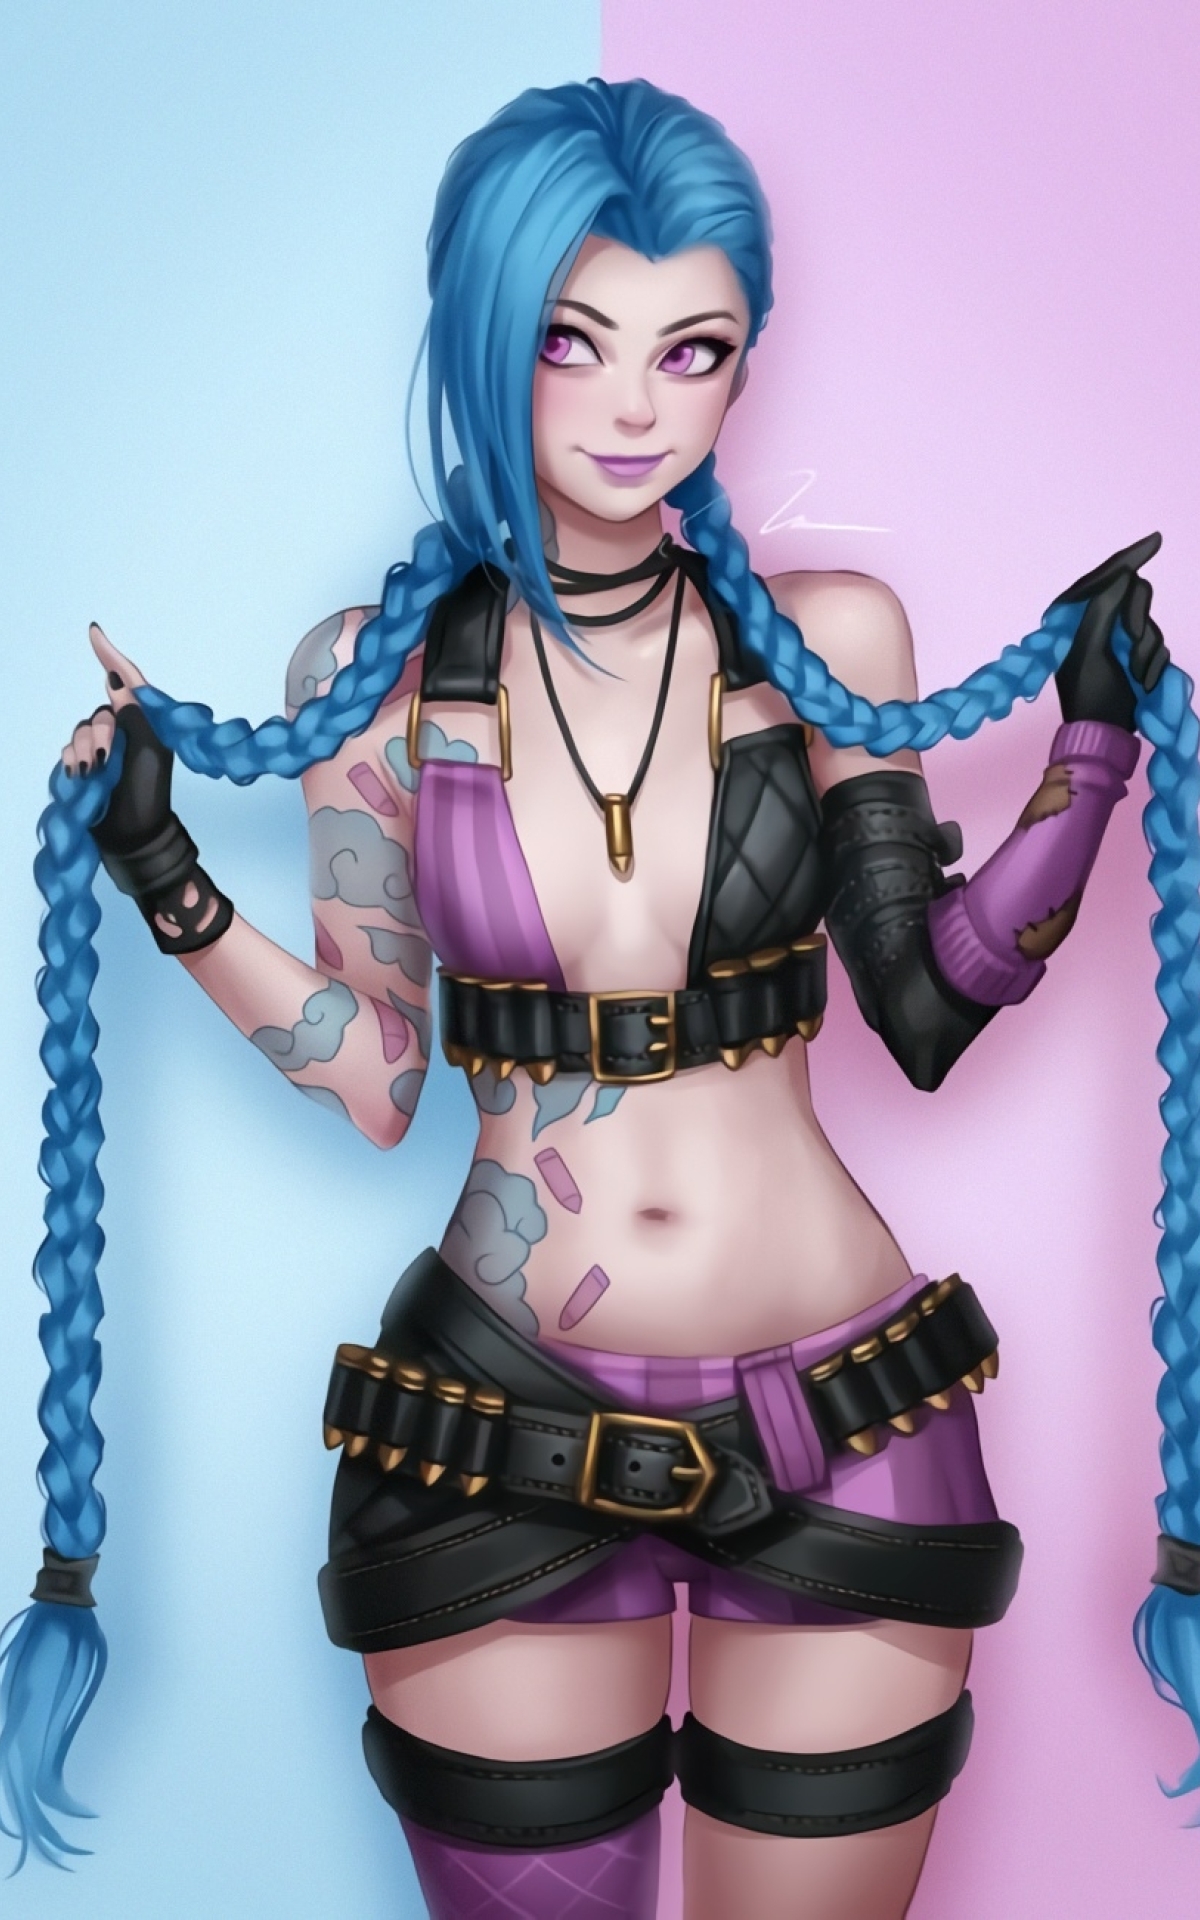 10x19 Jinx League Of Legends 10x19 Resolution Wallpaper Hd Games 4k Wallpapers Images Photos And Background Wallpapers Den